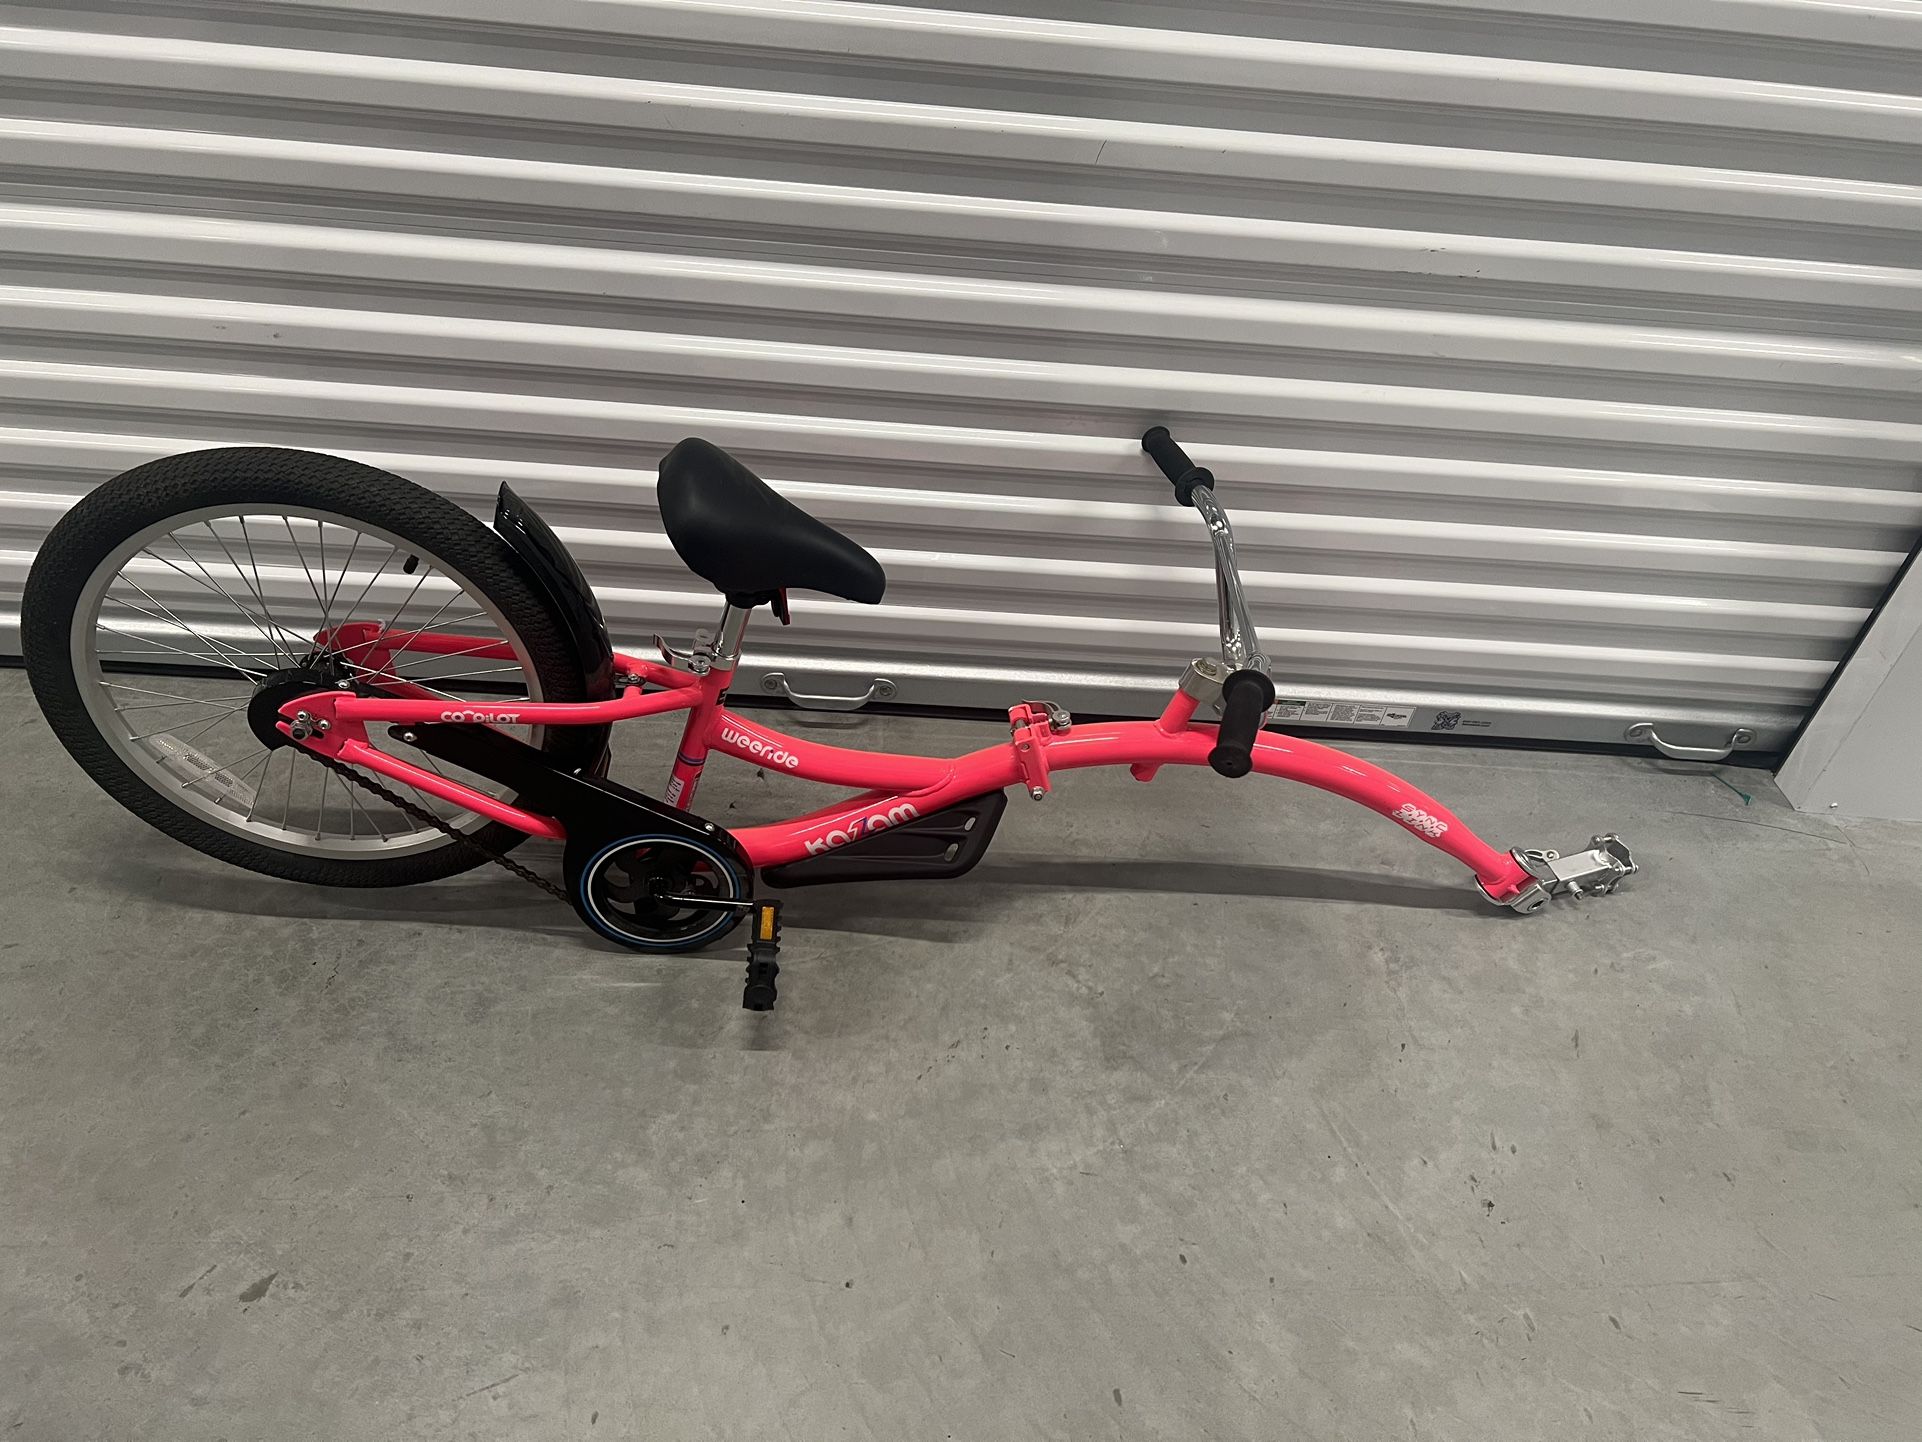 Co-Pilot WeeRide Folding Tag along Bike Attachment 20” Child Kids Tandem Trailer. Used in very good condition with a few minor scratches and scuff mar